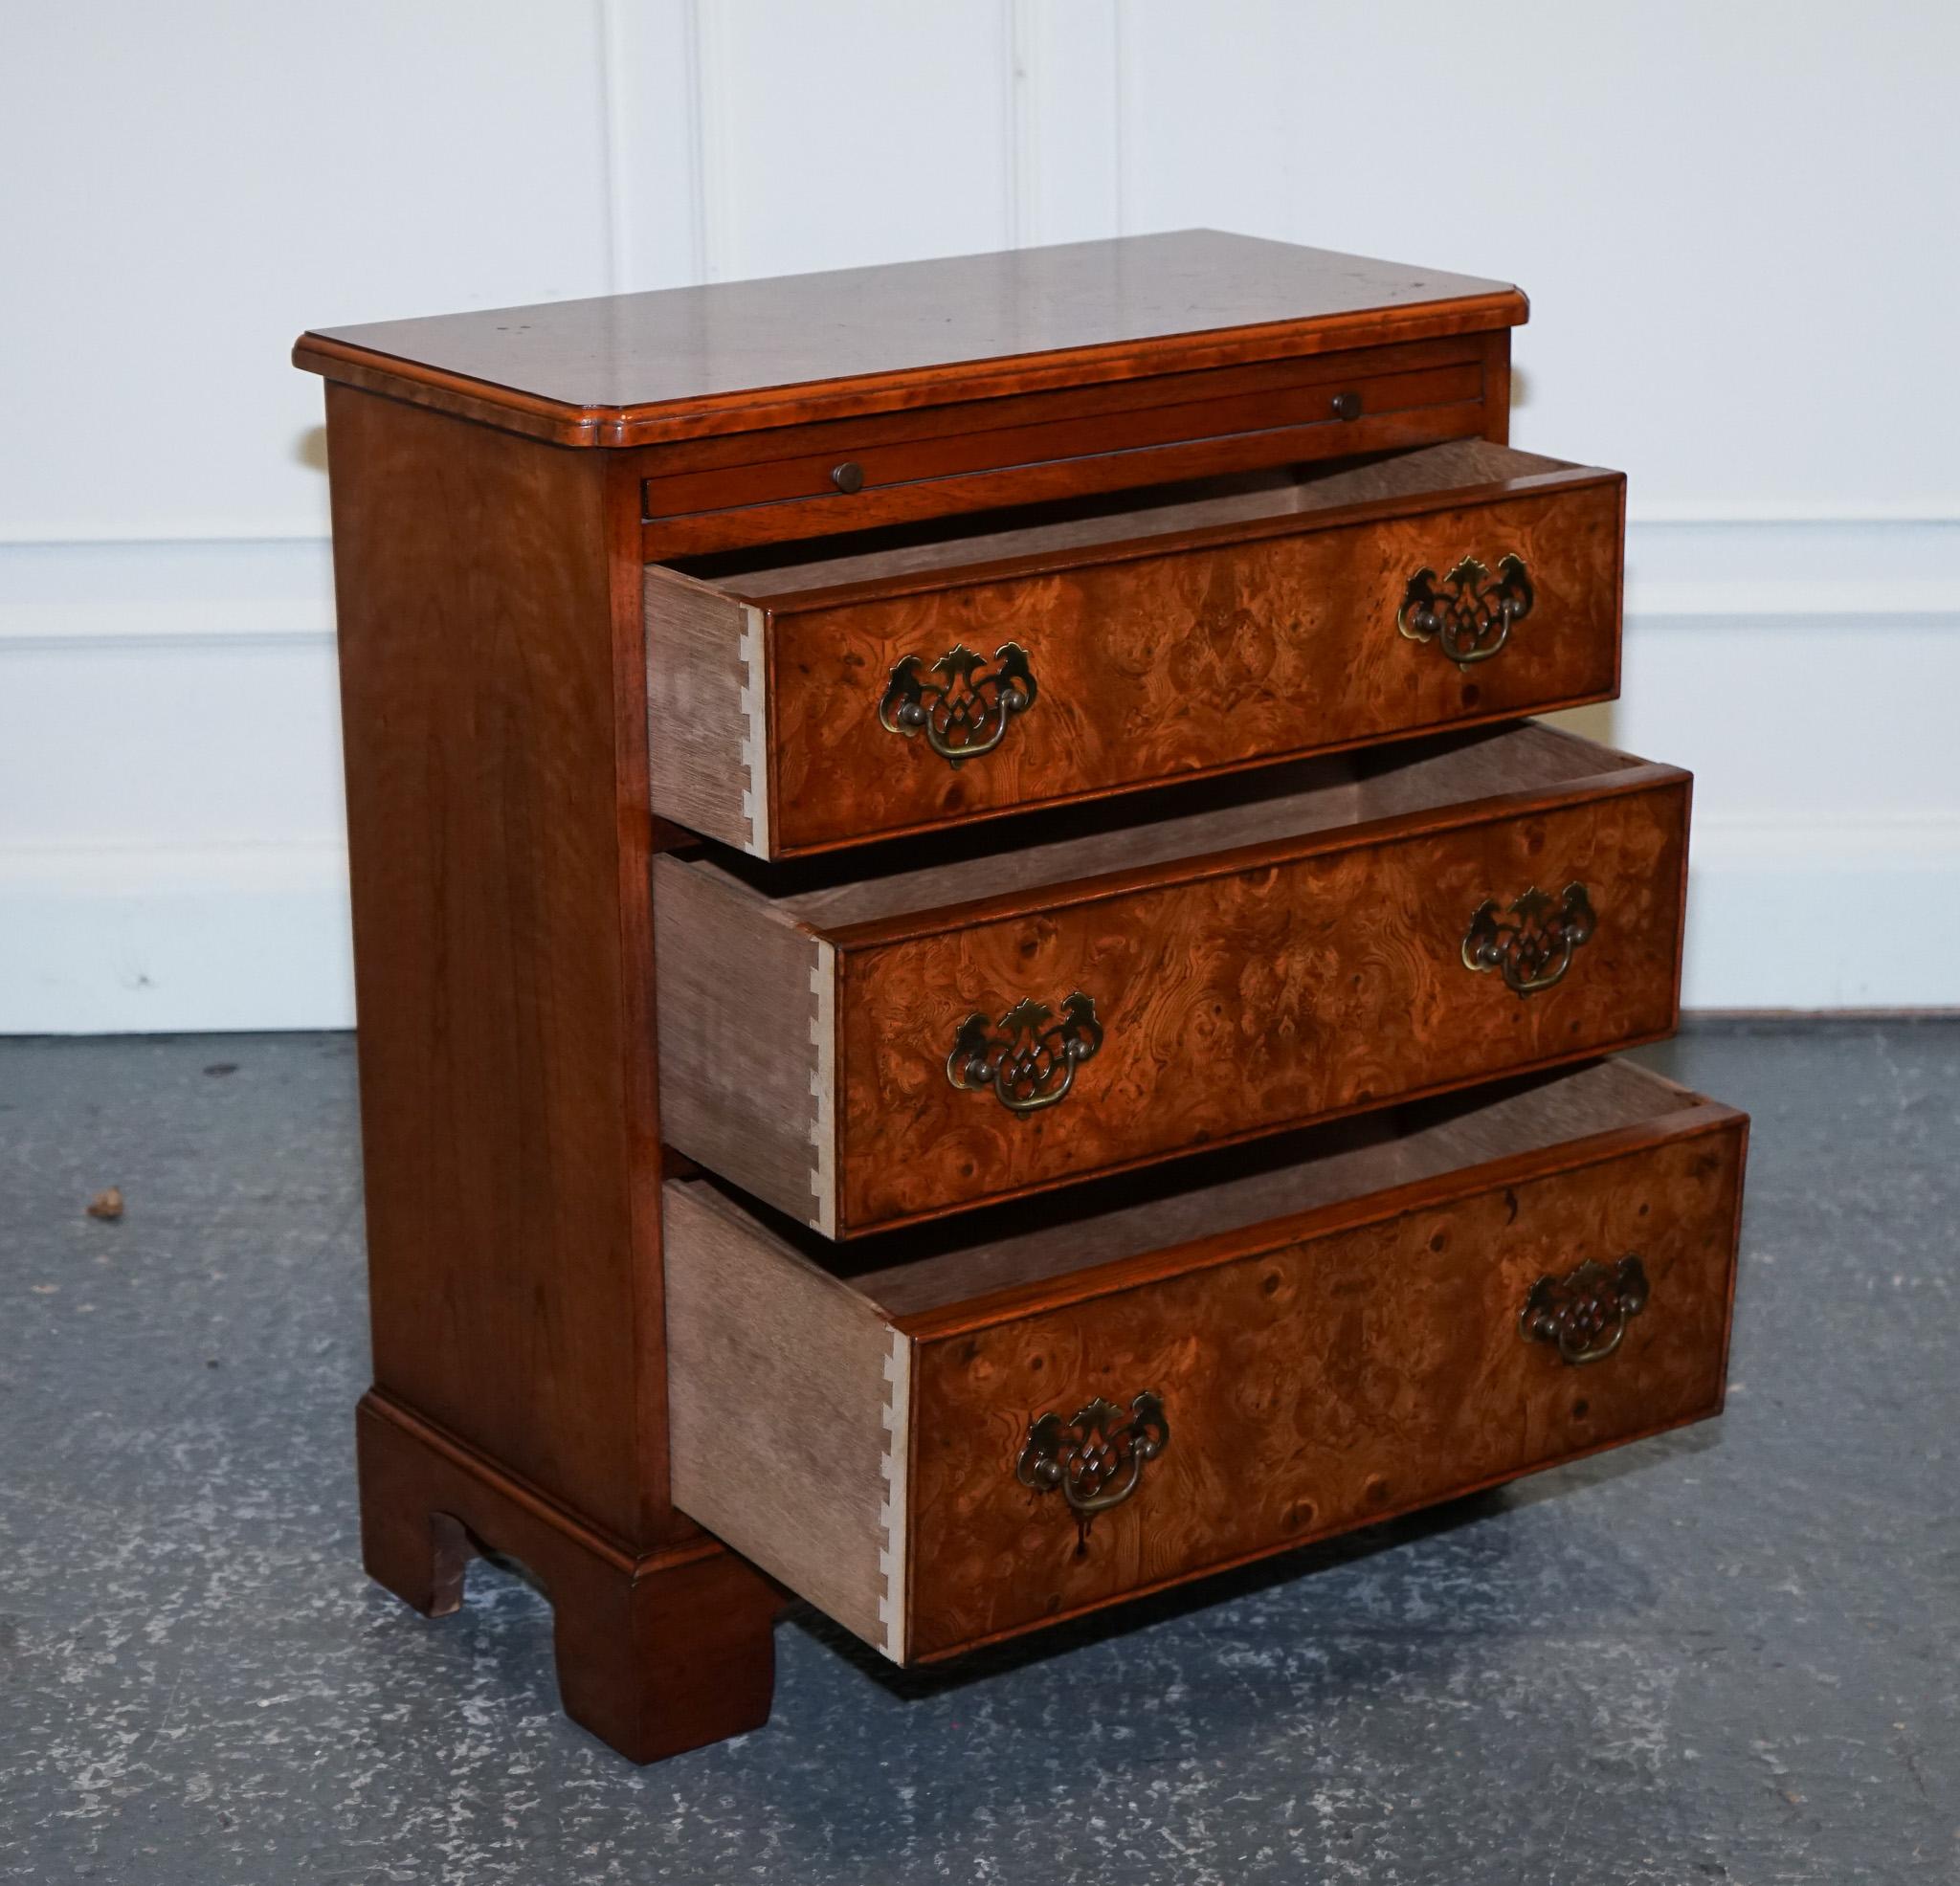 
We are delighted to offer for sale this Lovely Vintage Burr Walnut Chest Of Drawers.

A lovely vintage burr walnut bachelor's chest of drawers with a butler slide is a timeless piece that exudes elegance and charm. Crafted from rich and warm burr